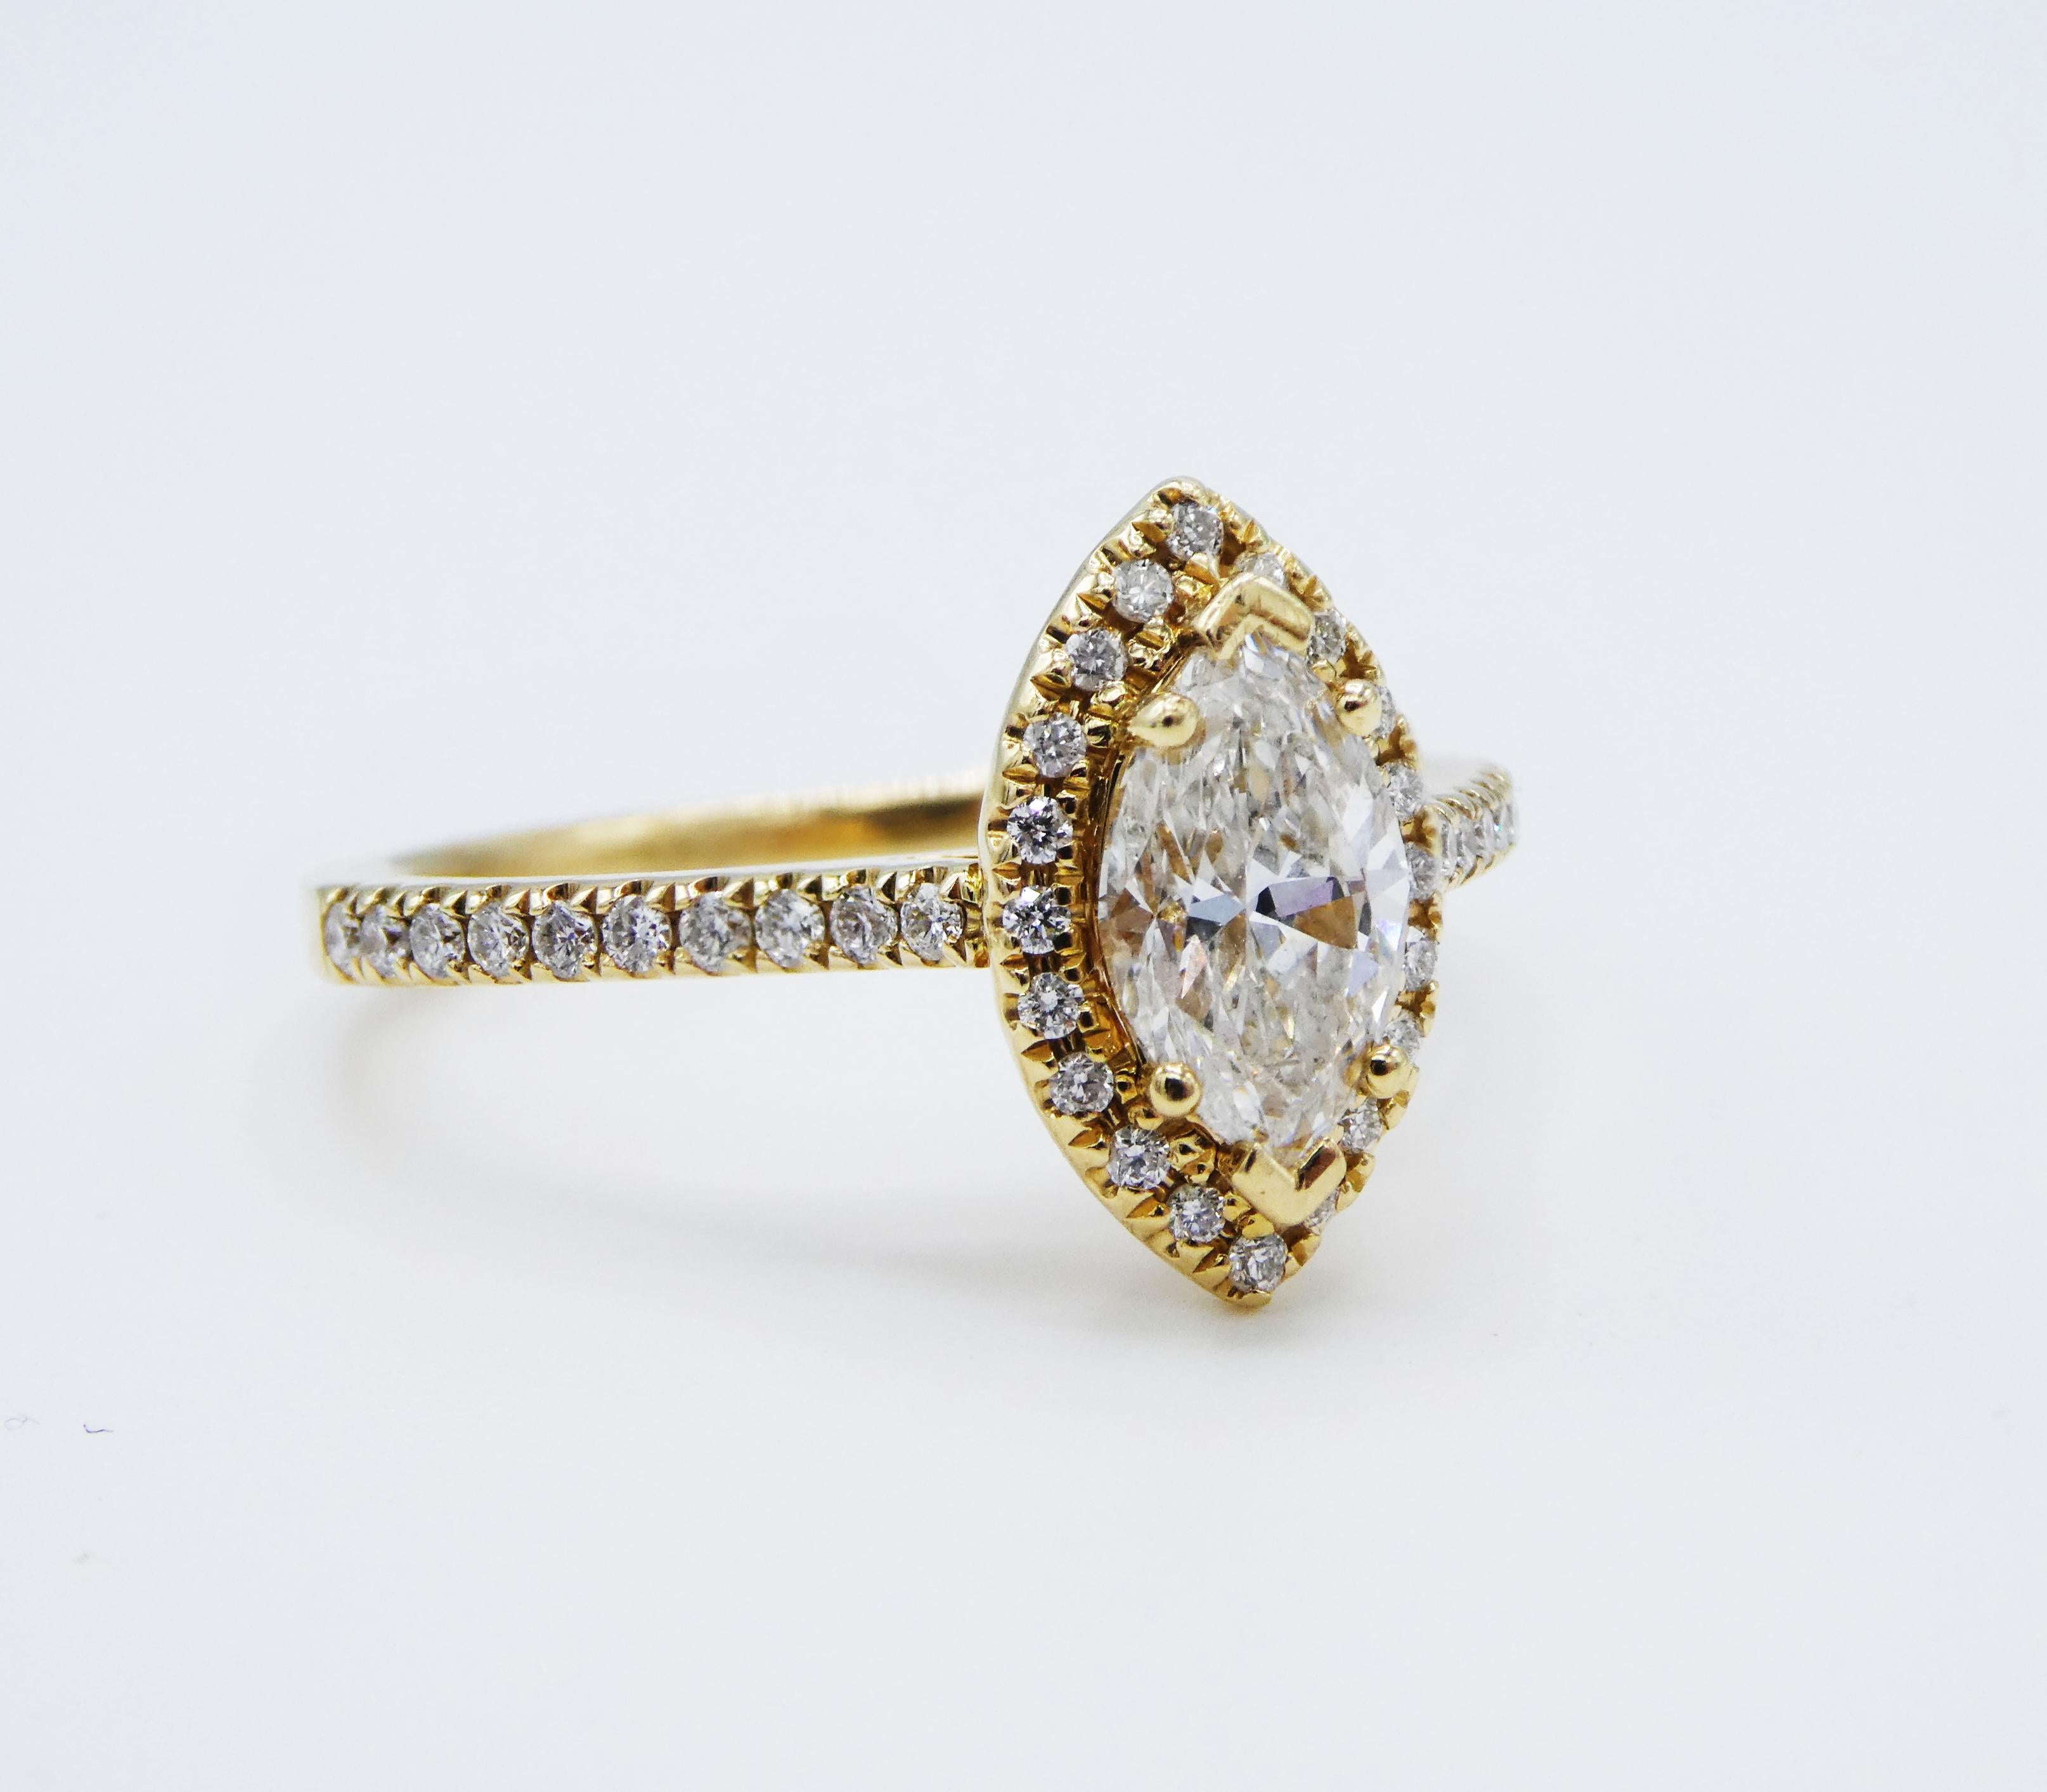 0.71ct 14K Yellow Gold Marquise Halo Diamond Engagement Ring Size 6

Metal: 14k yellow gold
Weight: 2.79 grams
Diamonds: 1 marquise shaped diamond, .71cts (marked in shank) H-I SI, 40 small round brilliant cut diamonds on the halo/band, .21 CTW